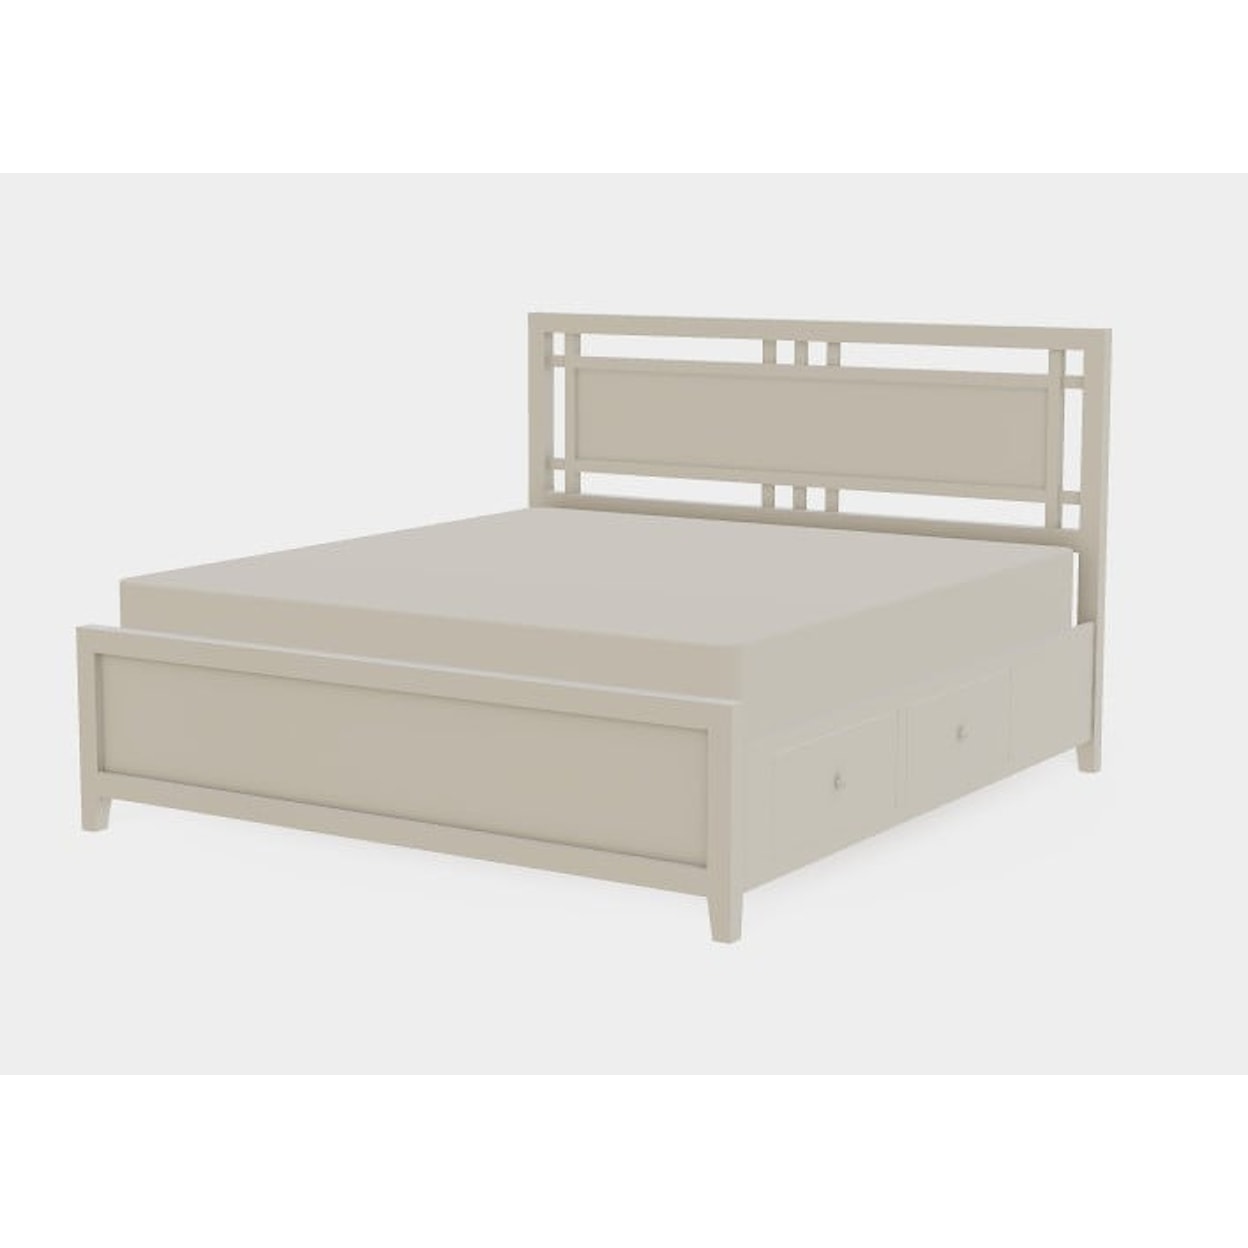 Mavin Atwood Group Atwood King Both Drawerside Gridwork Bed